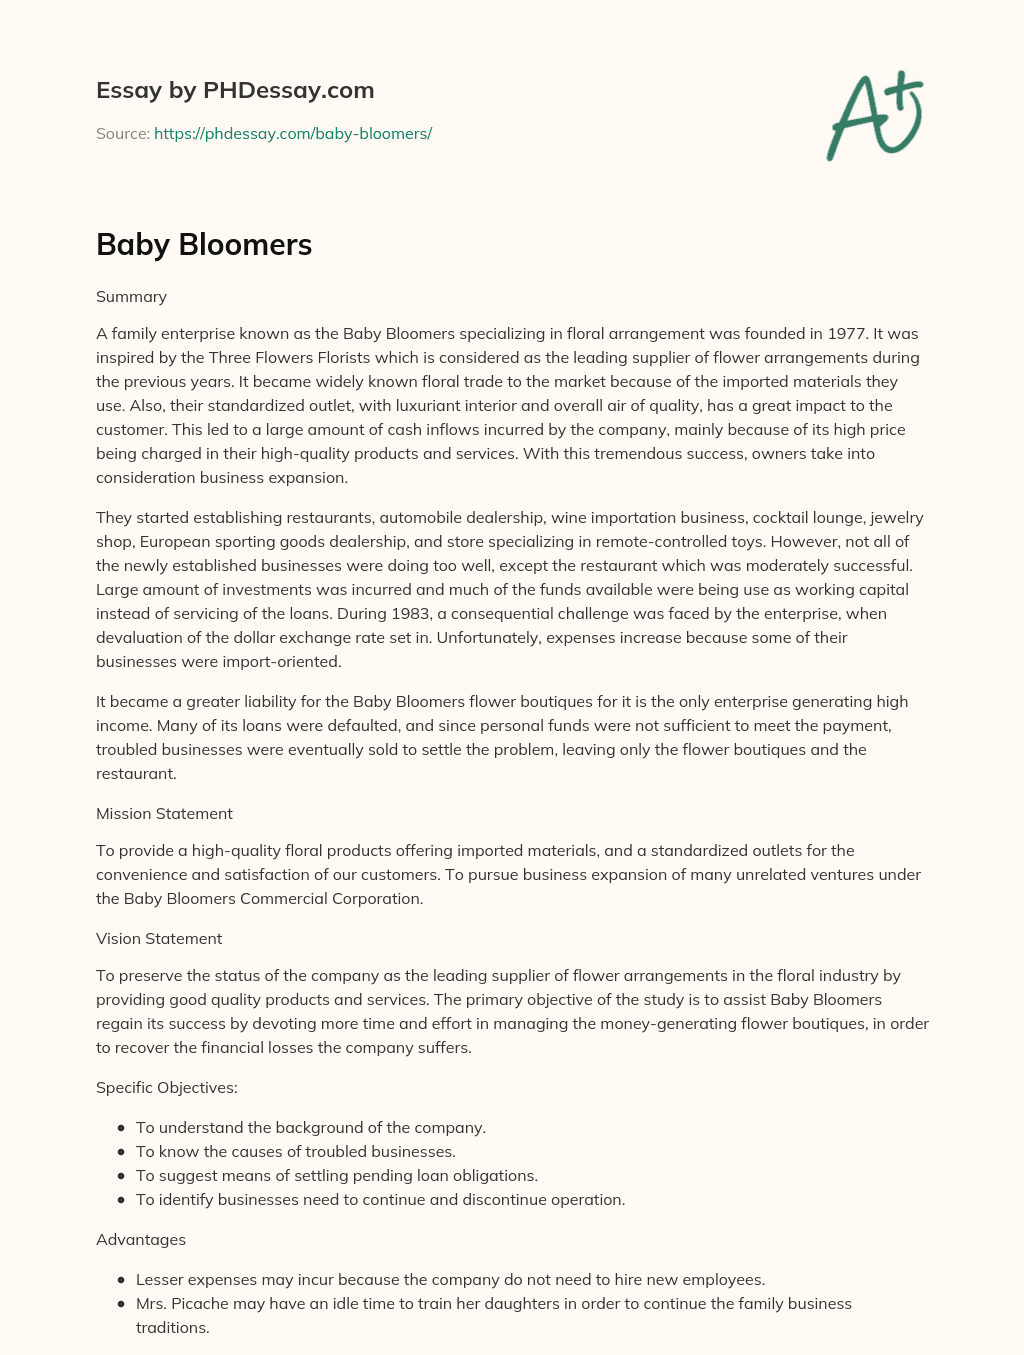 Baby Bloomers essay